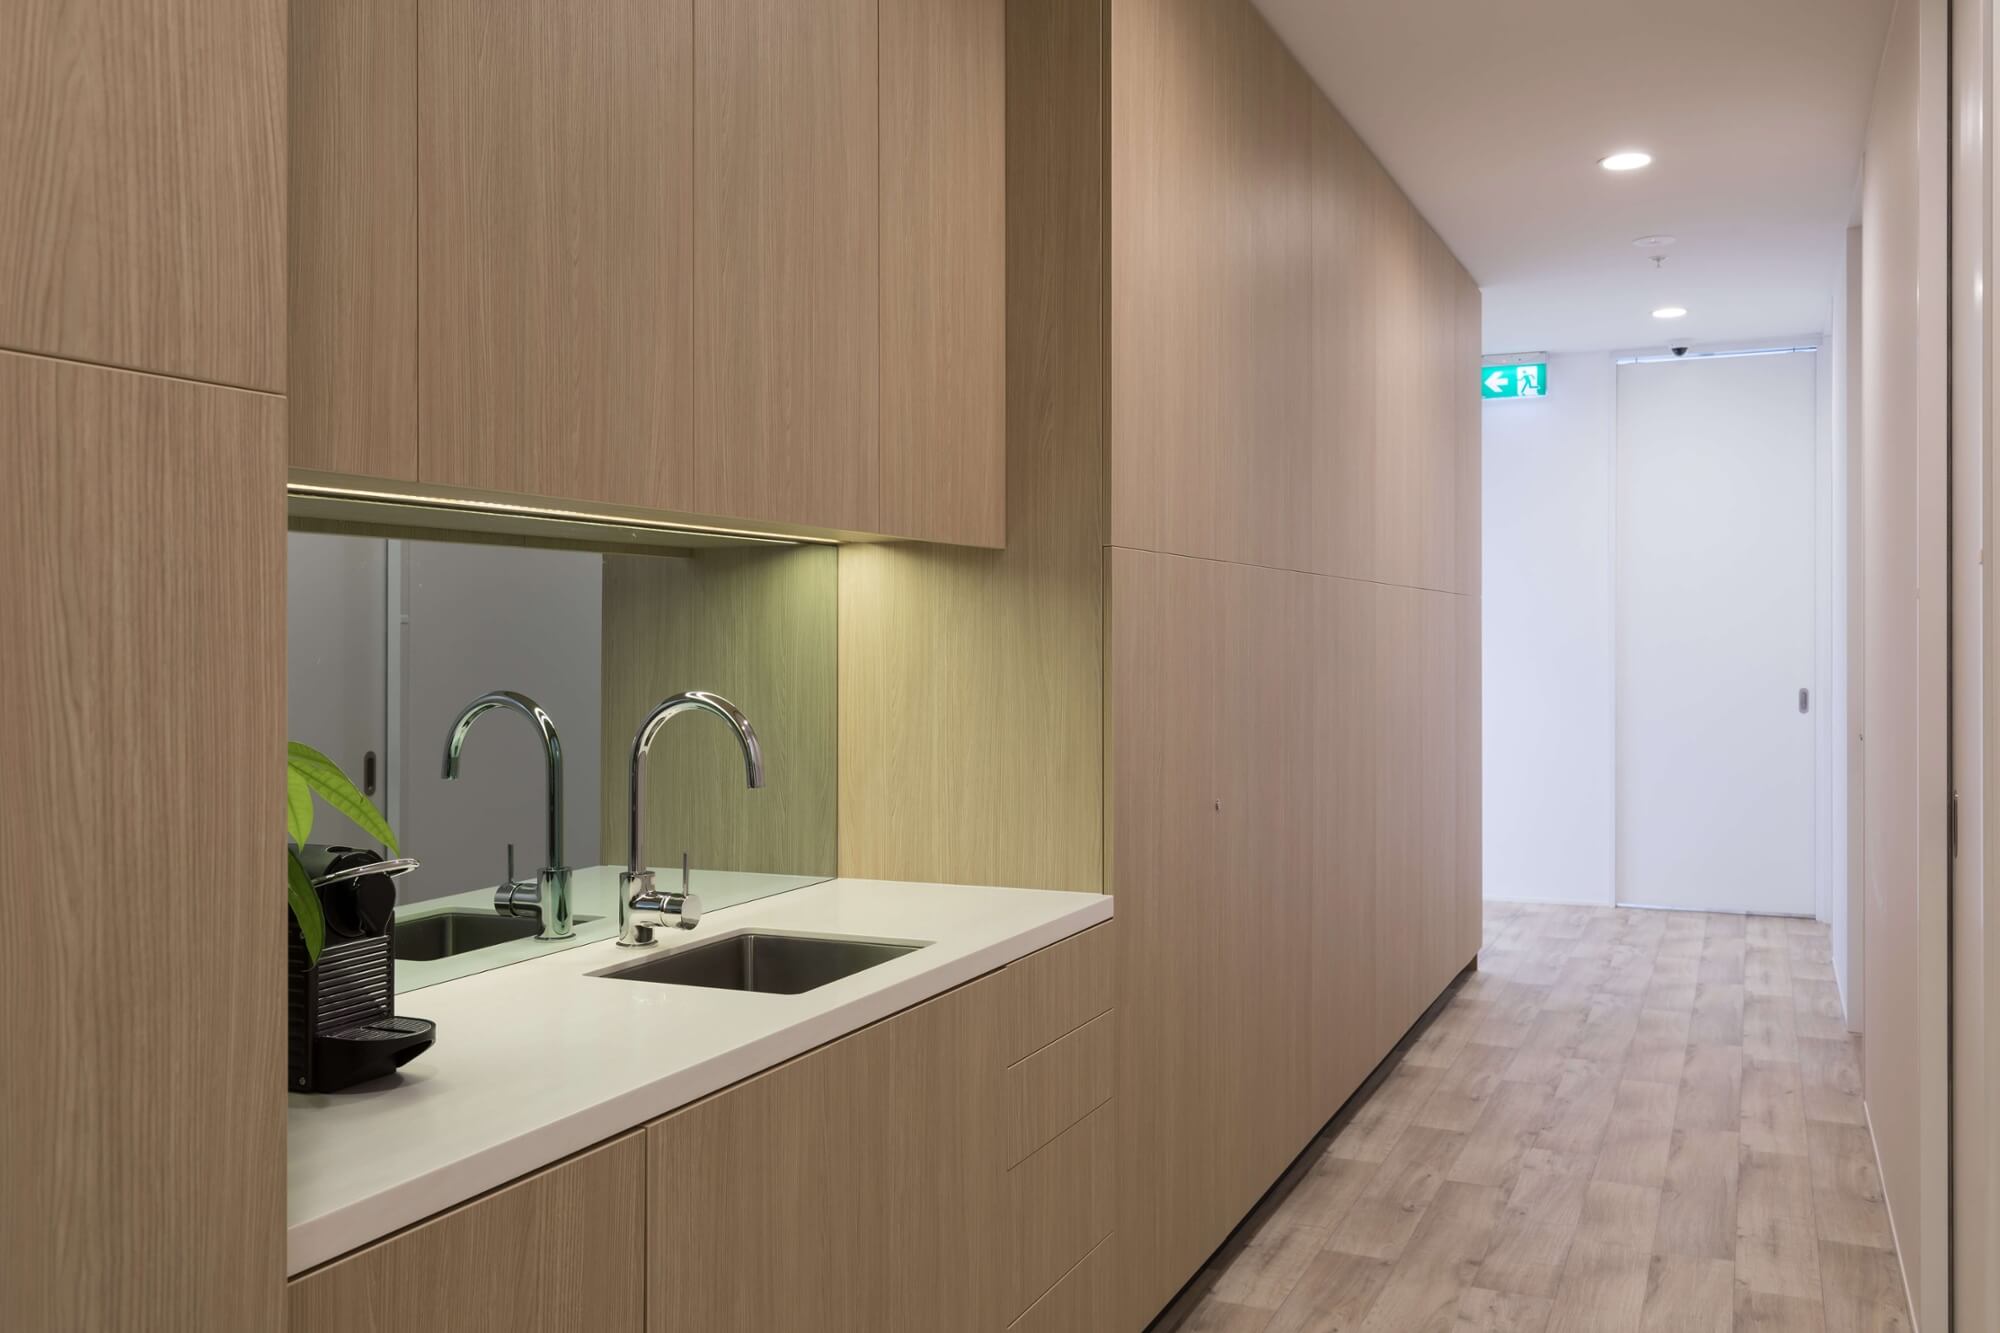 dental practice fit out